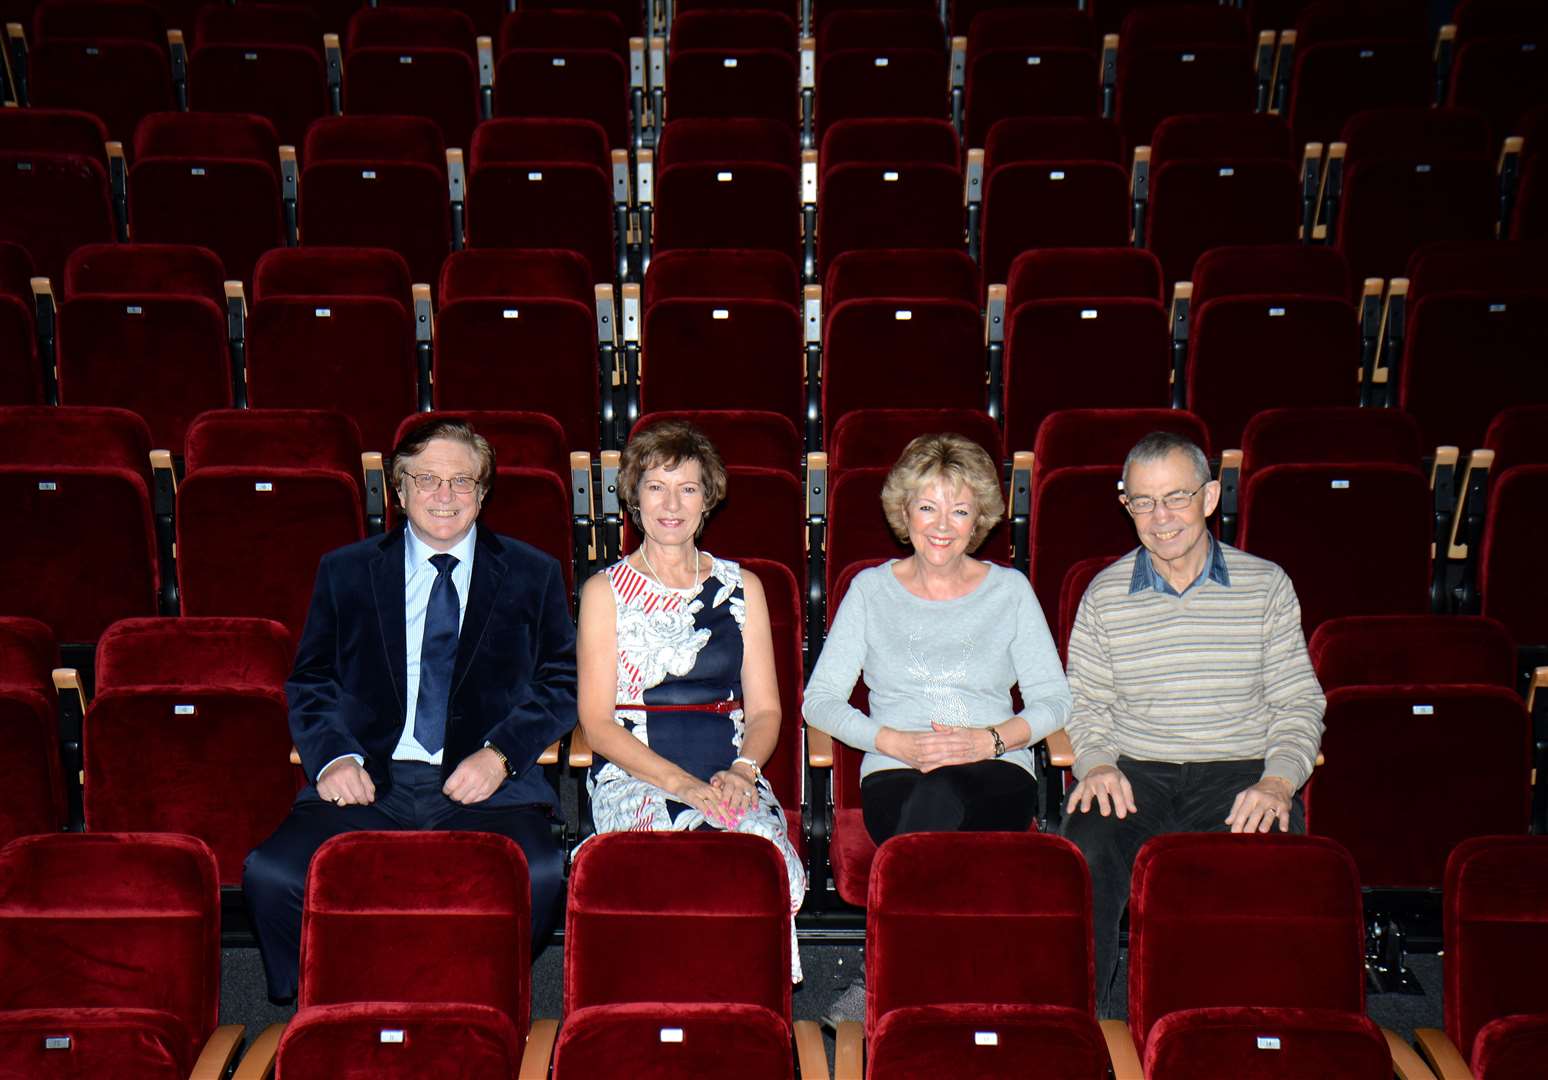 Rhodes Arts Centre, Bishop's Stortford.Clive Weir is organising a Strictly style dance competition.l-r: Stephen and Hazel Evans (Evans School of Dance), Clive and Bernie Weir.Stephen and Hazel will be teaching the dancers. .Pic: Vikki Lince. (33226071)